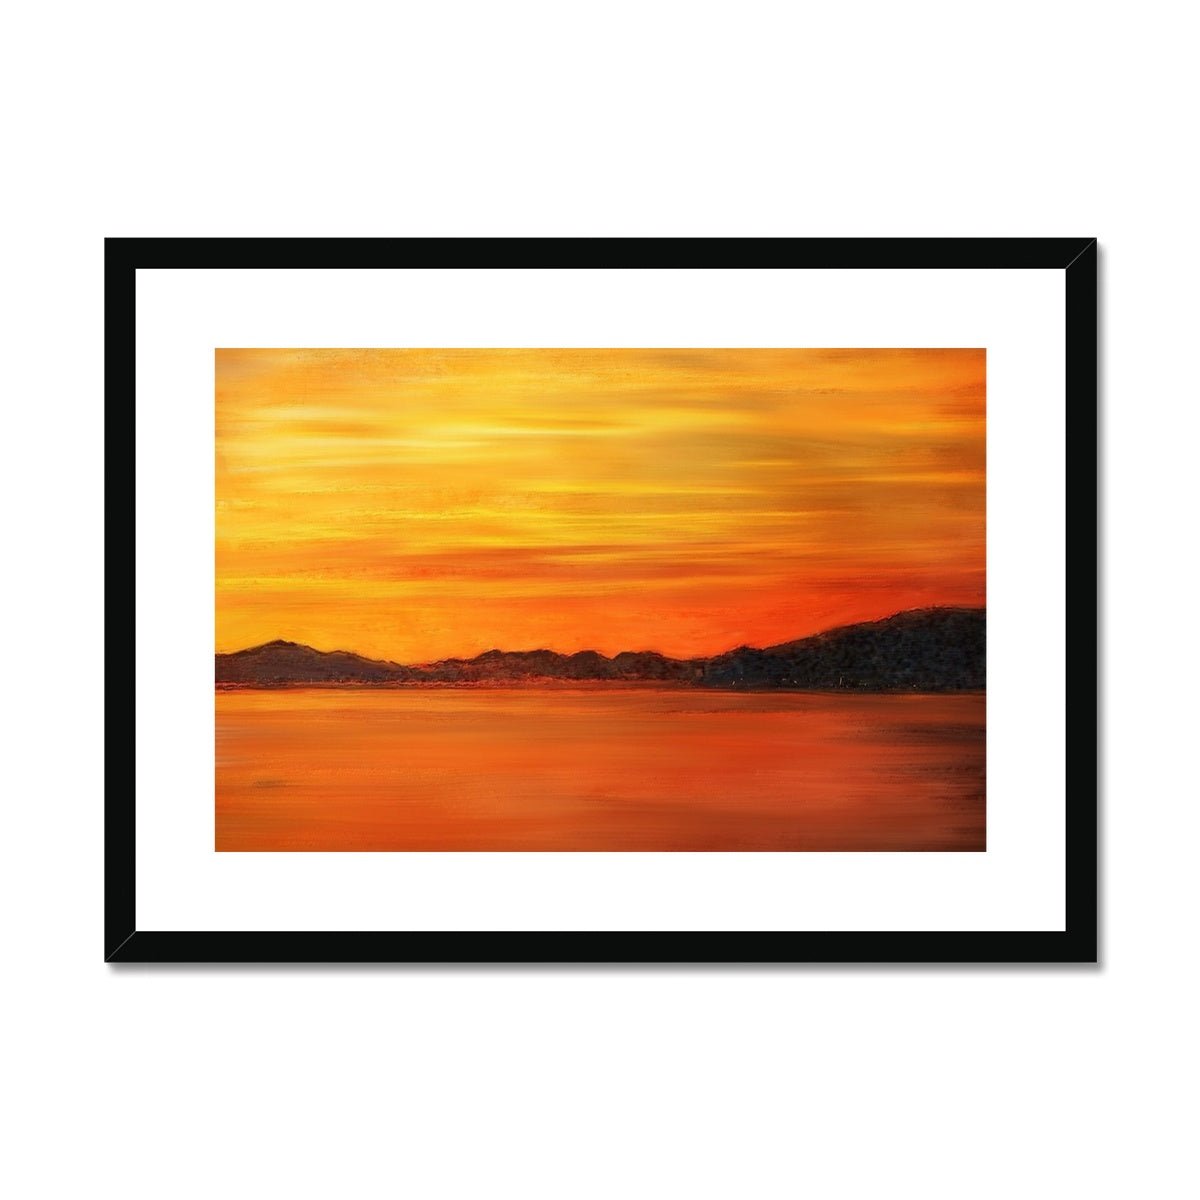 Loch Fyne Sunset Painting | Framed & Mounted Prints From Scotland-Framed & Mounted Prints-Scottish Lochs & Mountains Art Gallery-A2 Landscape-Black Frame-Paintings, Prints, Homeware, Art Gifts From Scotland By Scottish Artist Kevin Hunter